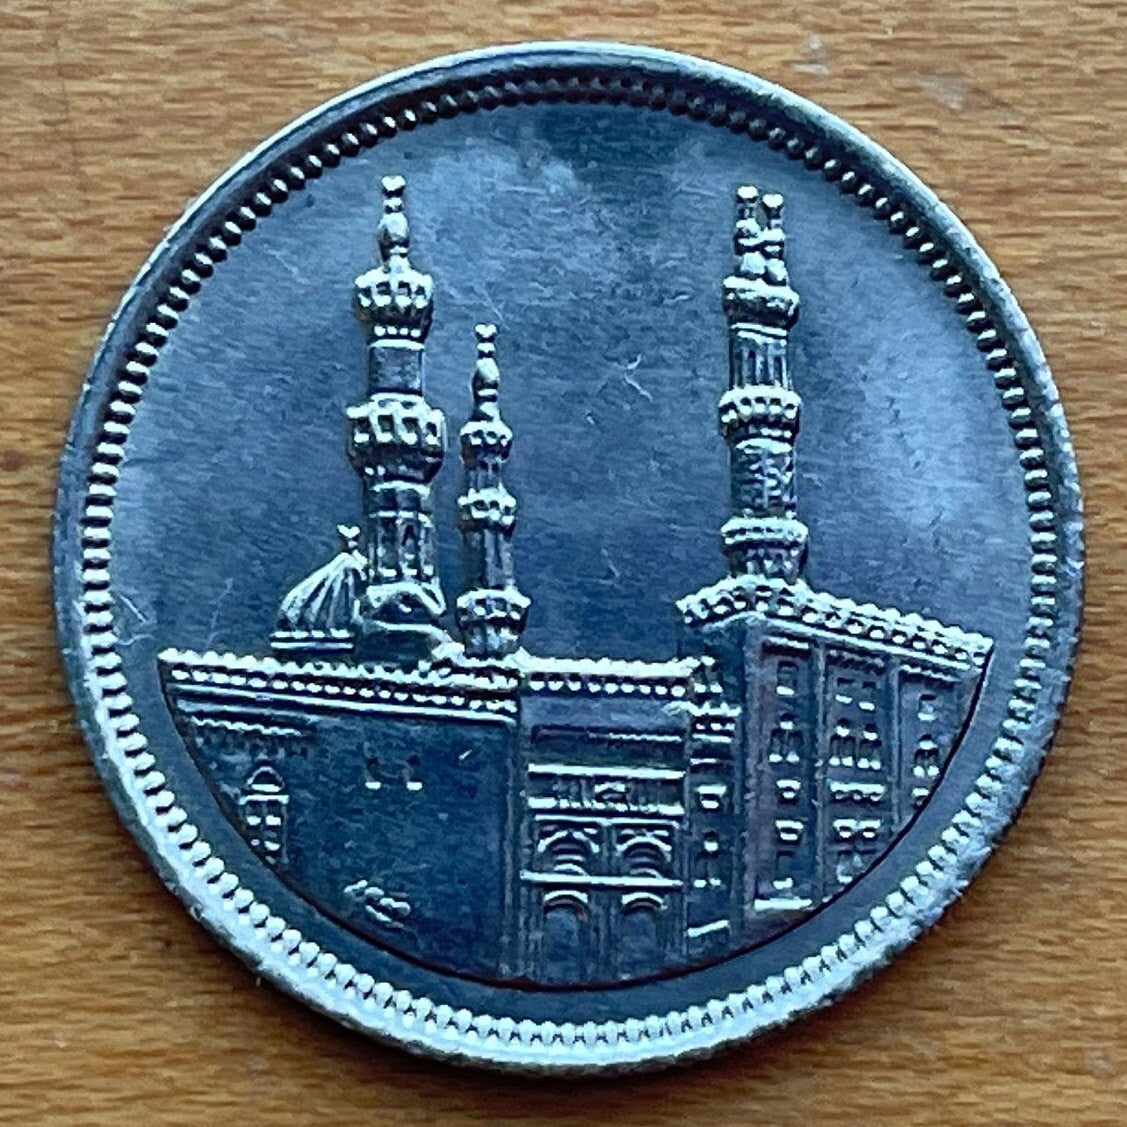 Al-Azhar Mosque 20 Quirsh Egypt Authentic Coin Money for Jewelry and Craft Making (1992) (University)